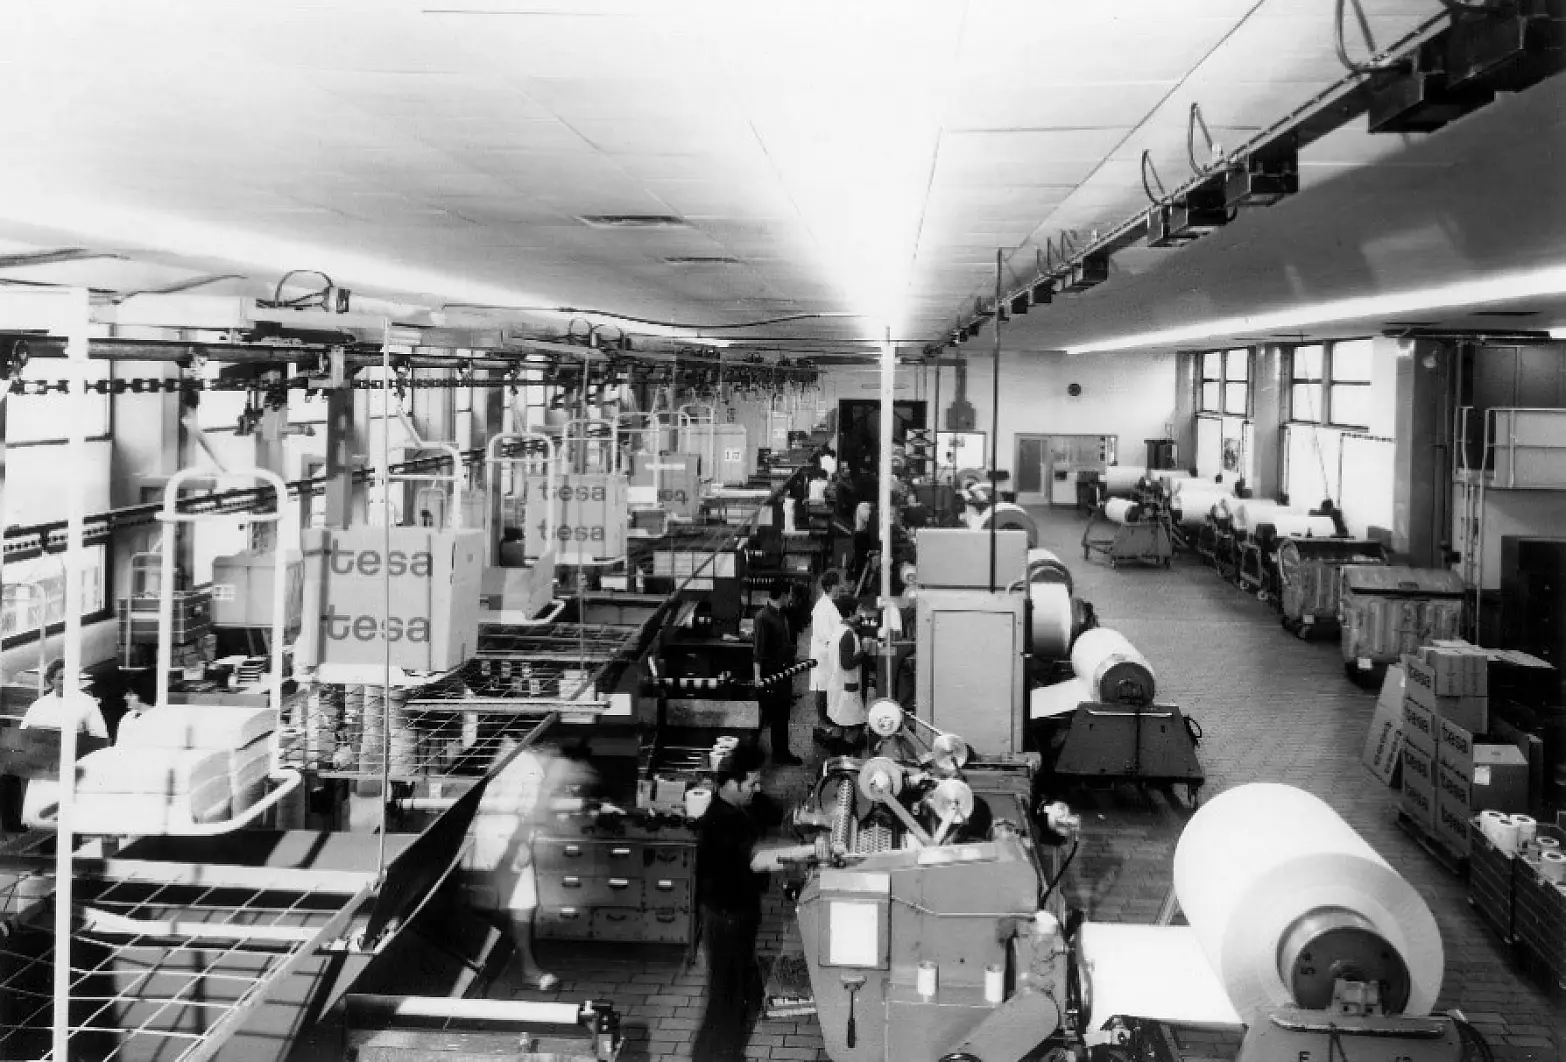 This is how the cutting hall at the tesa plant in Offenburg looked like in 1970. Jumbo rolls were cut into conventional rolls that customers then may find on the shelves.